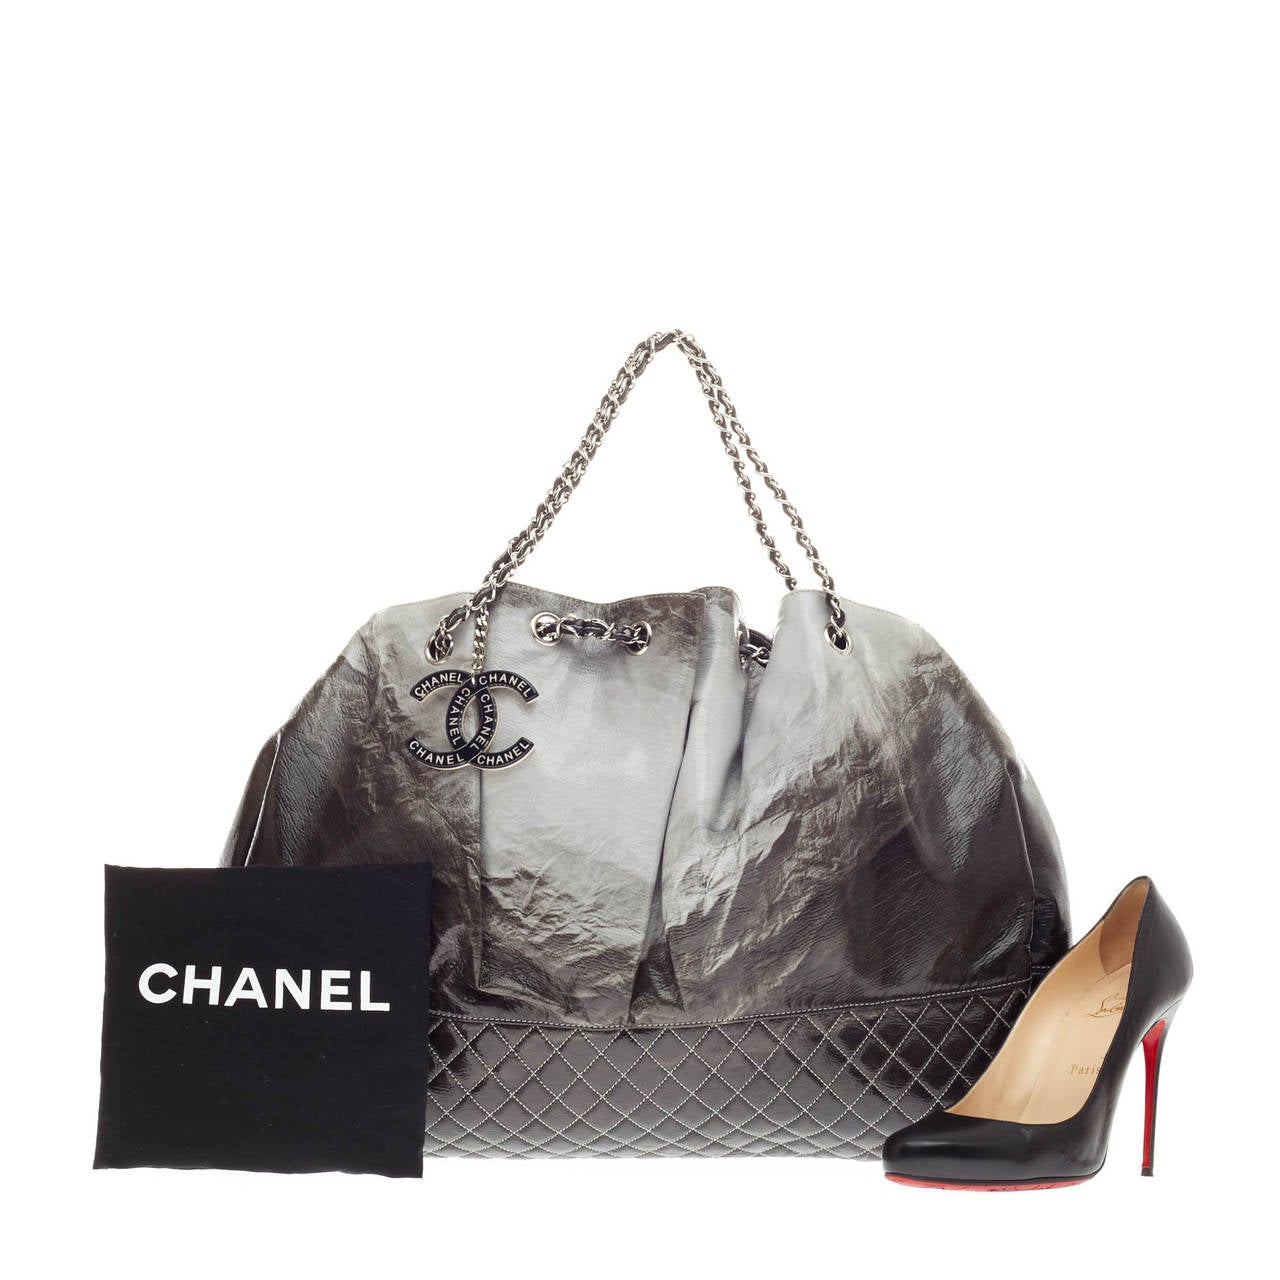 This authentic Chanel Melrose Degrade Cabas Tote Patent is perfect for the on-the-go fashionista. Crafted from grey and black patent leather, this oversized stand-out tote features quilted diamond base, woven-in leather chain strap that cinches or